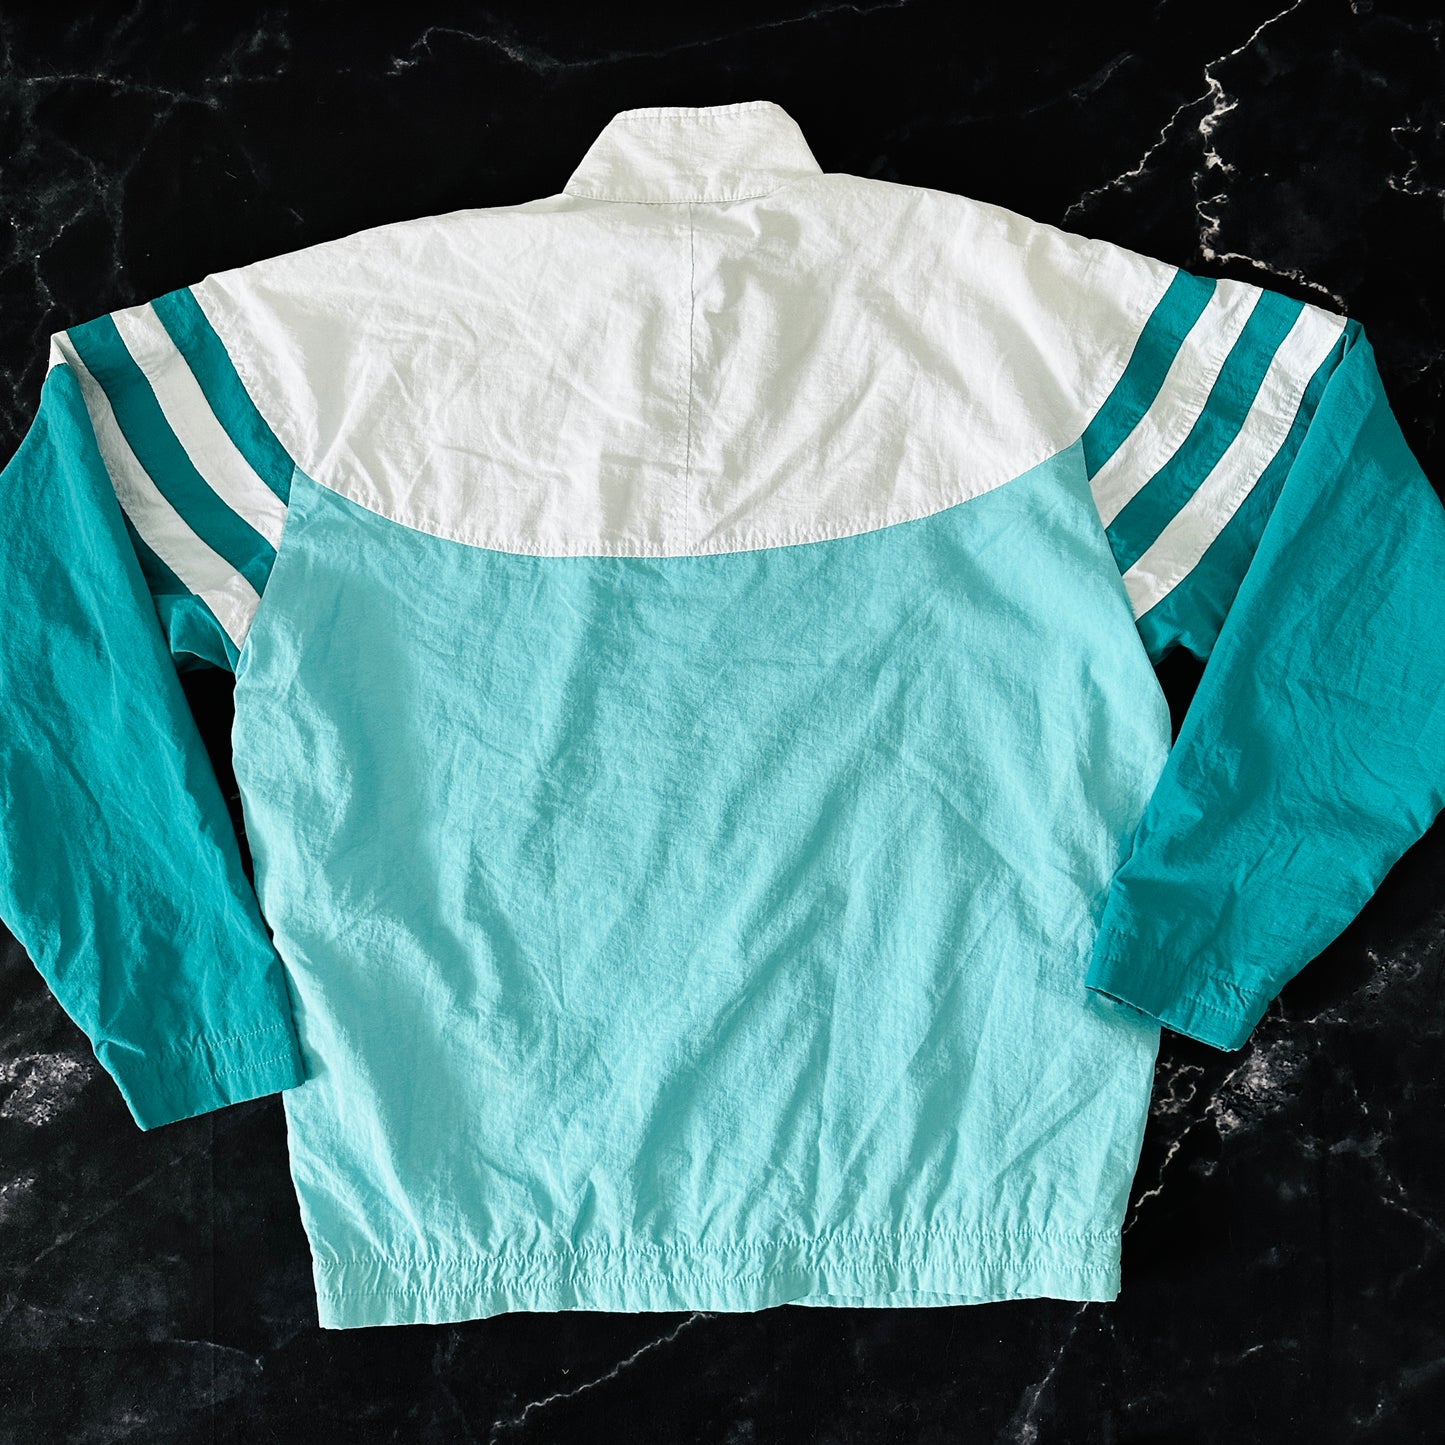 Fila Vintage 80s Track Top - 52 - Made in Italy